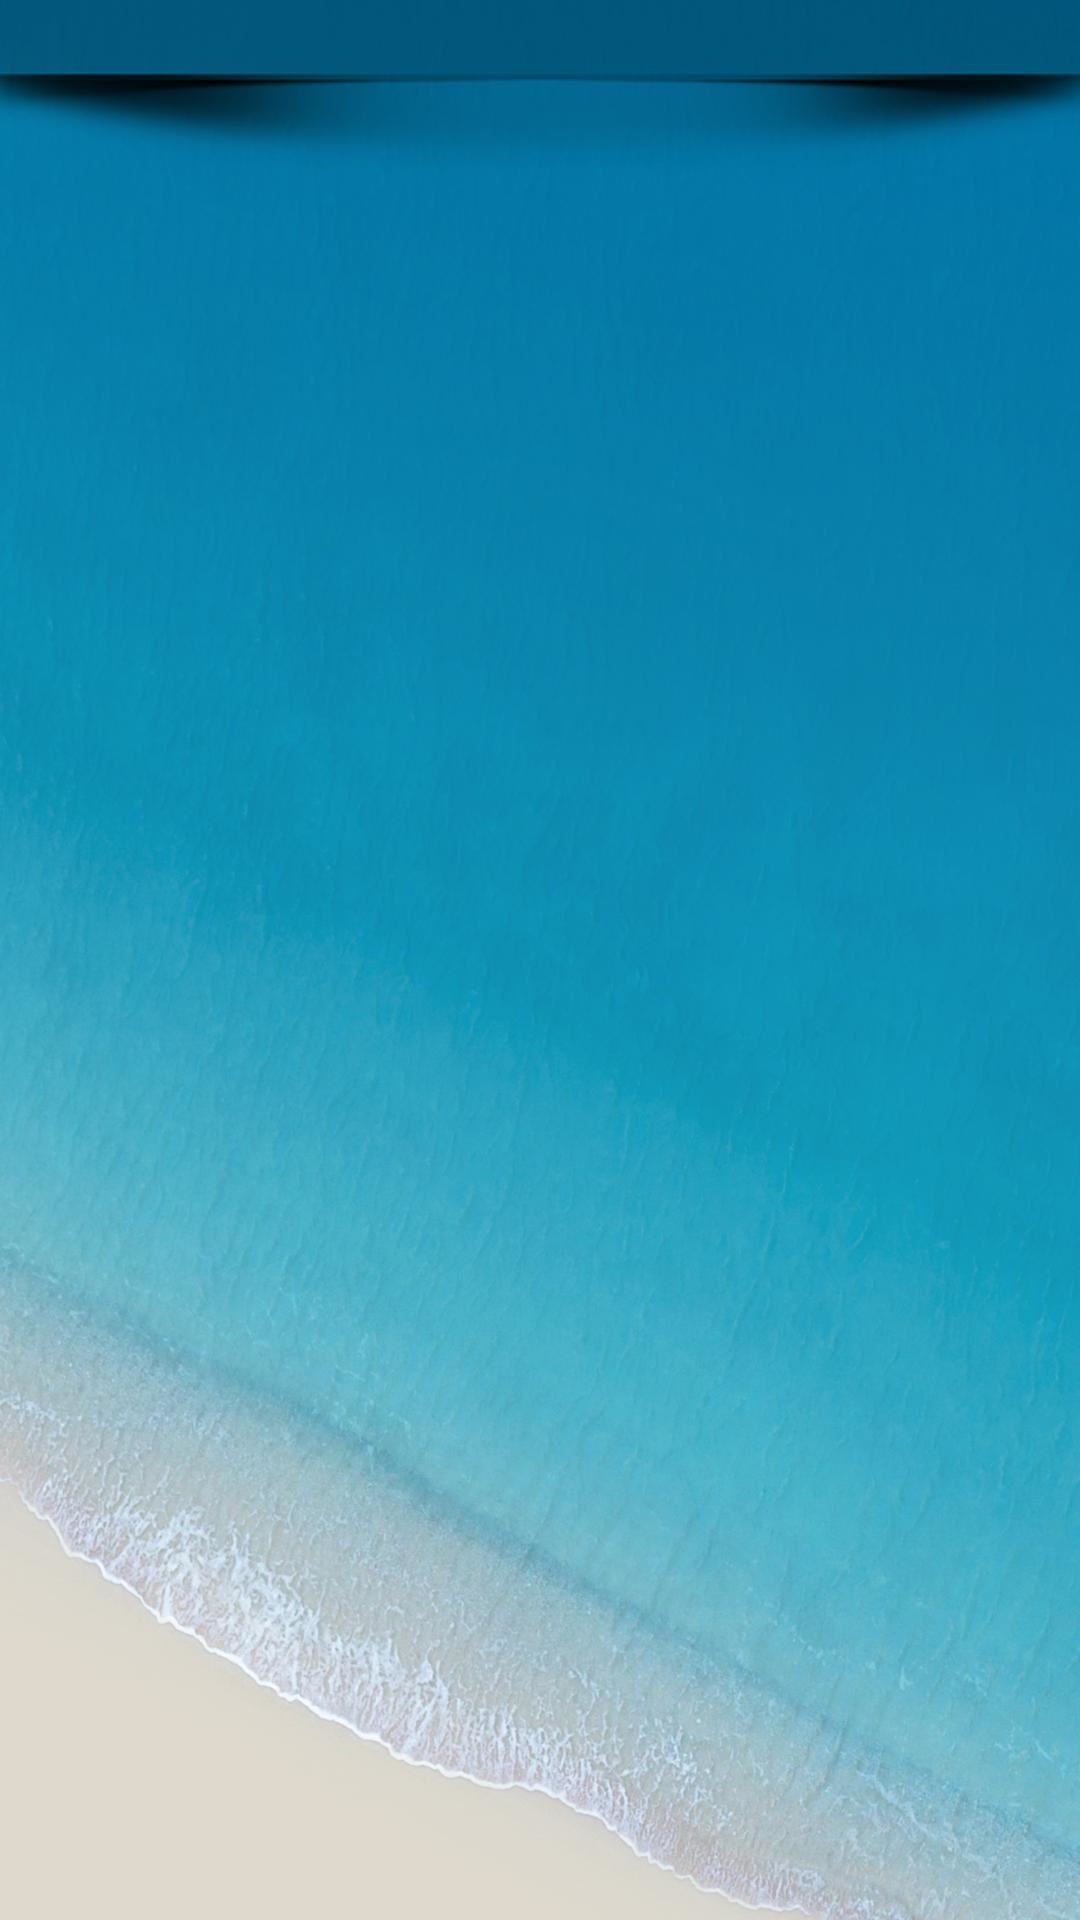 1080x1920 Full HD wallpaper for mobile phones, with the status bar shadow effect.  Beautiful and